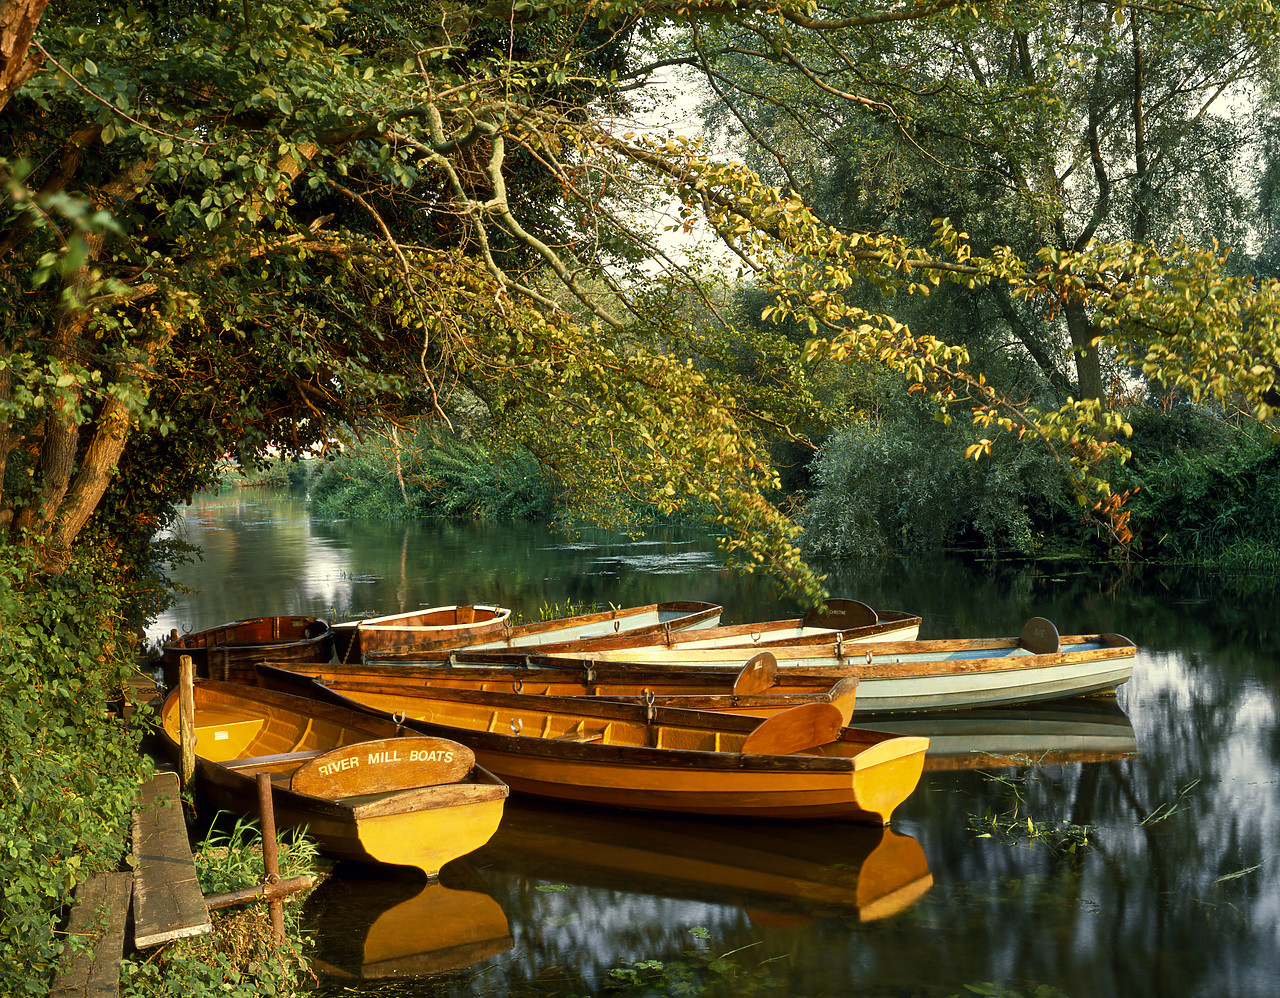 #892413-1 - Boats on River Ouse, Houghton, Cambridgeshire, England